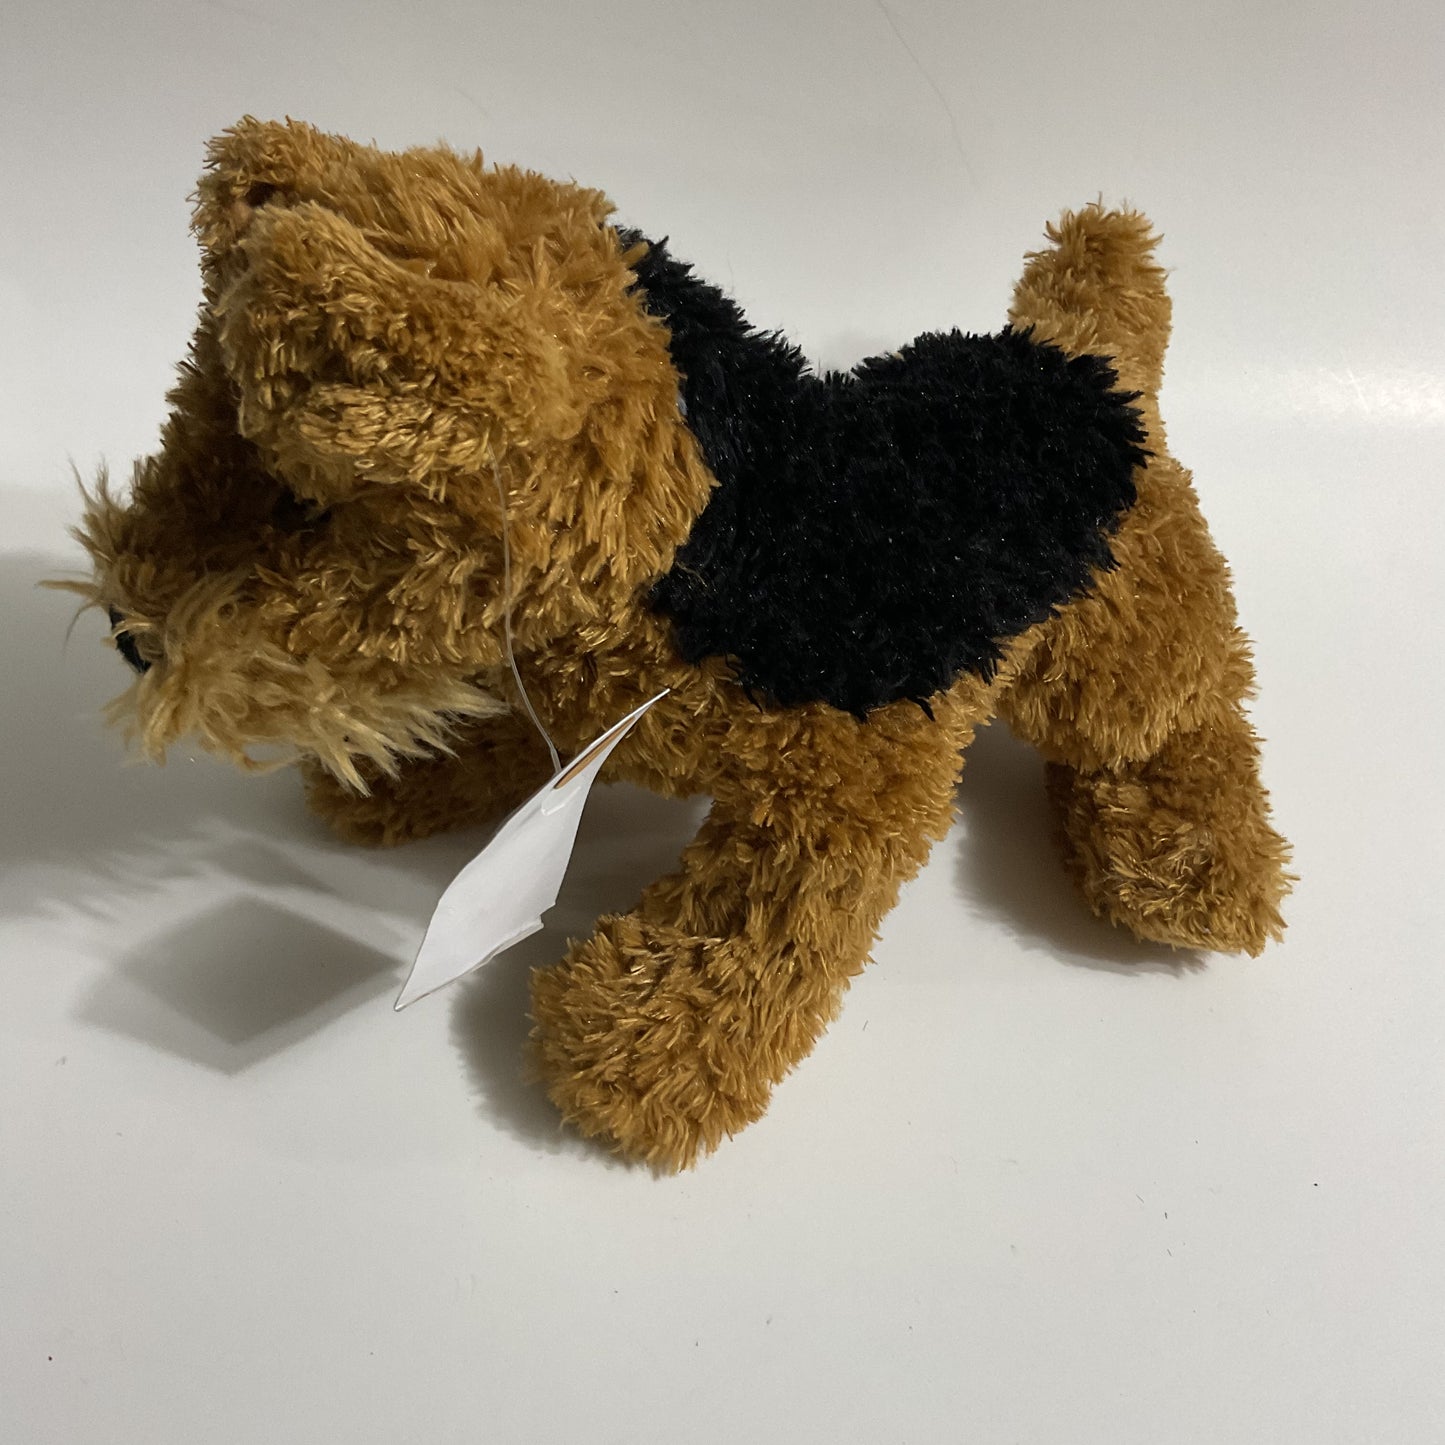 Douglas Airedale Terrier The Cuddle Toy.